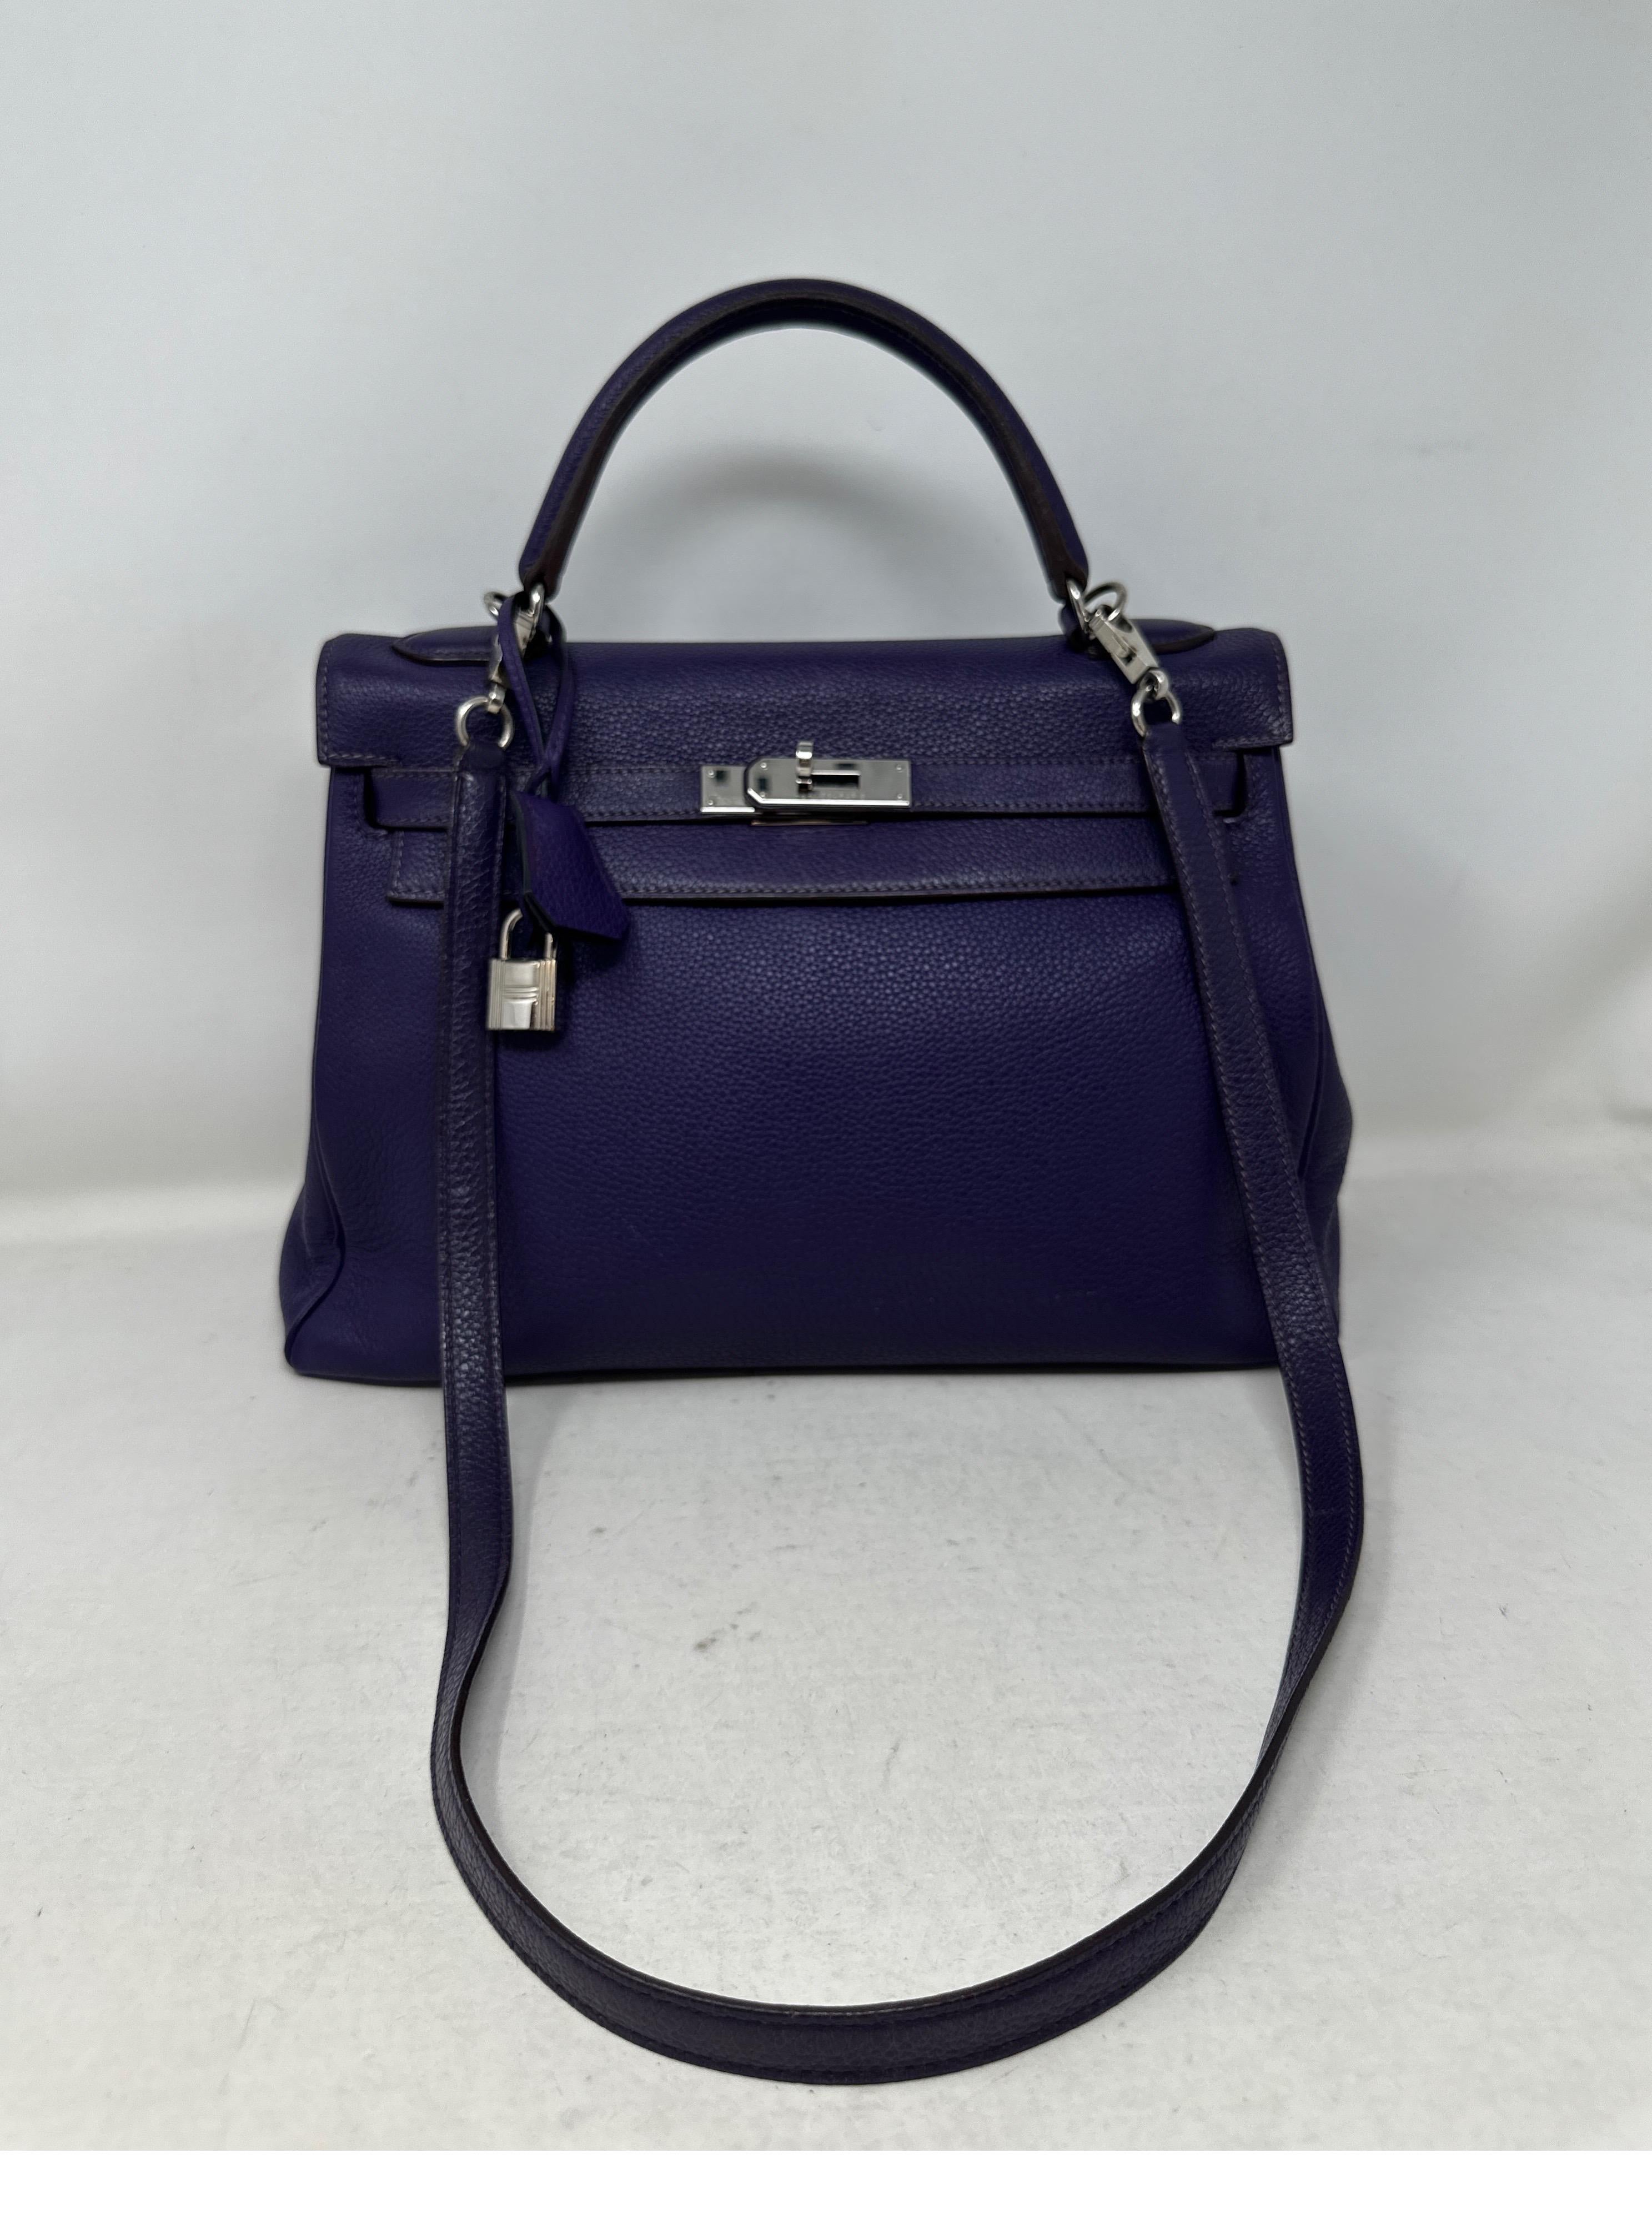 Hermes Purple Kelly 32 Bag. Good condition. Light wear throughout. Unique dark purple color. Paladium silver hardware. Interior clean. Plastic is still on hardware. Great deal for a rare color Kelly bag. Includes clochette, lock, keys, and dust bag.